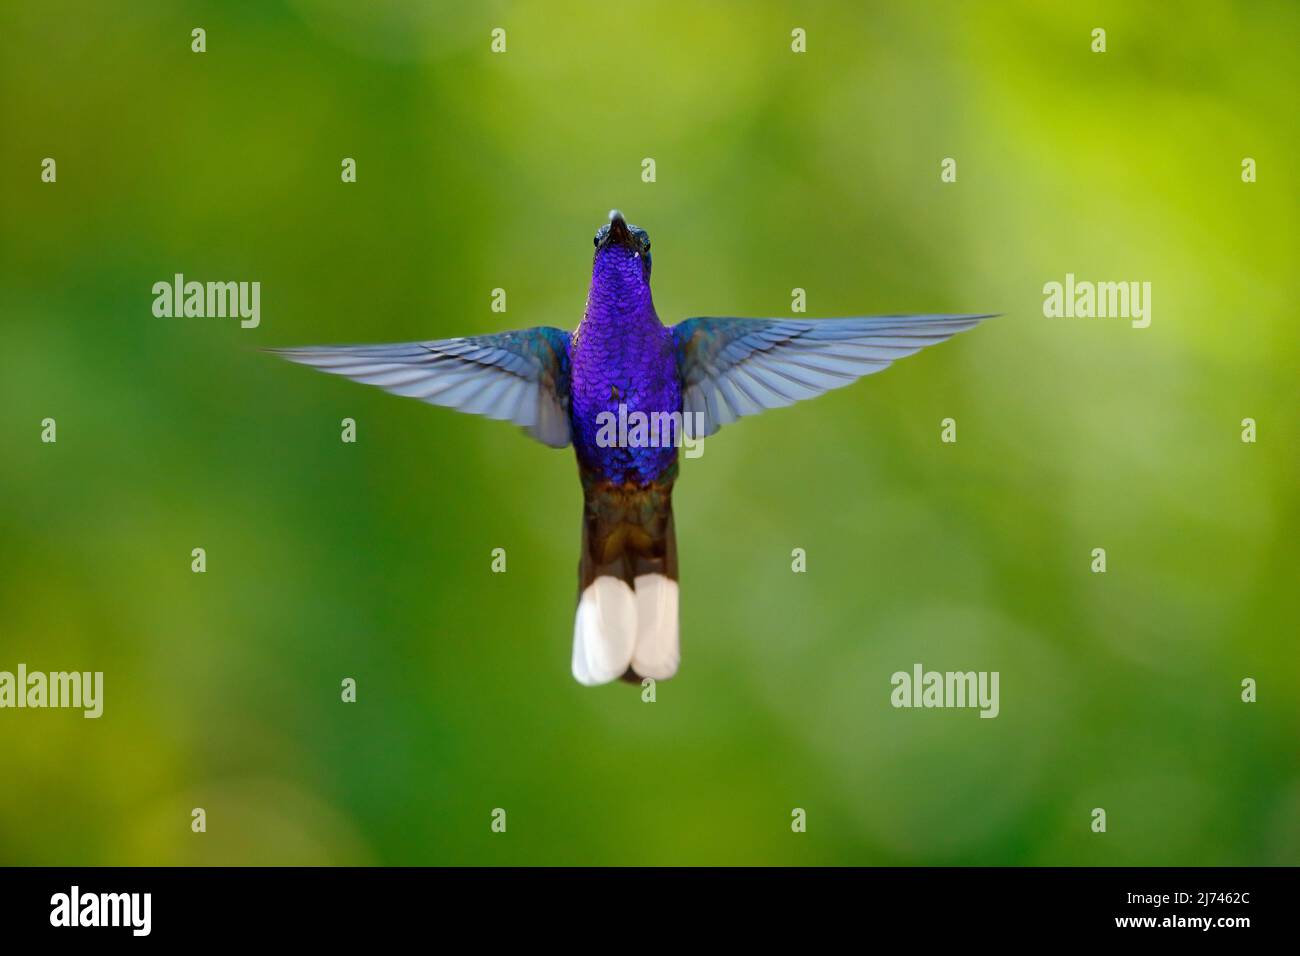 Hummingbird Violet Sabrewing, Campylopterus hemileucurus, flying in the tropical forest, La Paz, Costa Rica Stock Photo